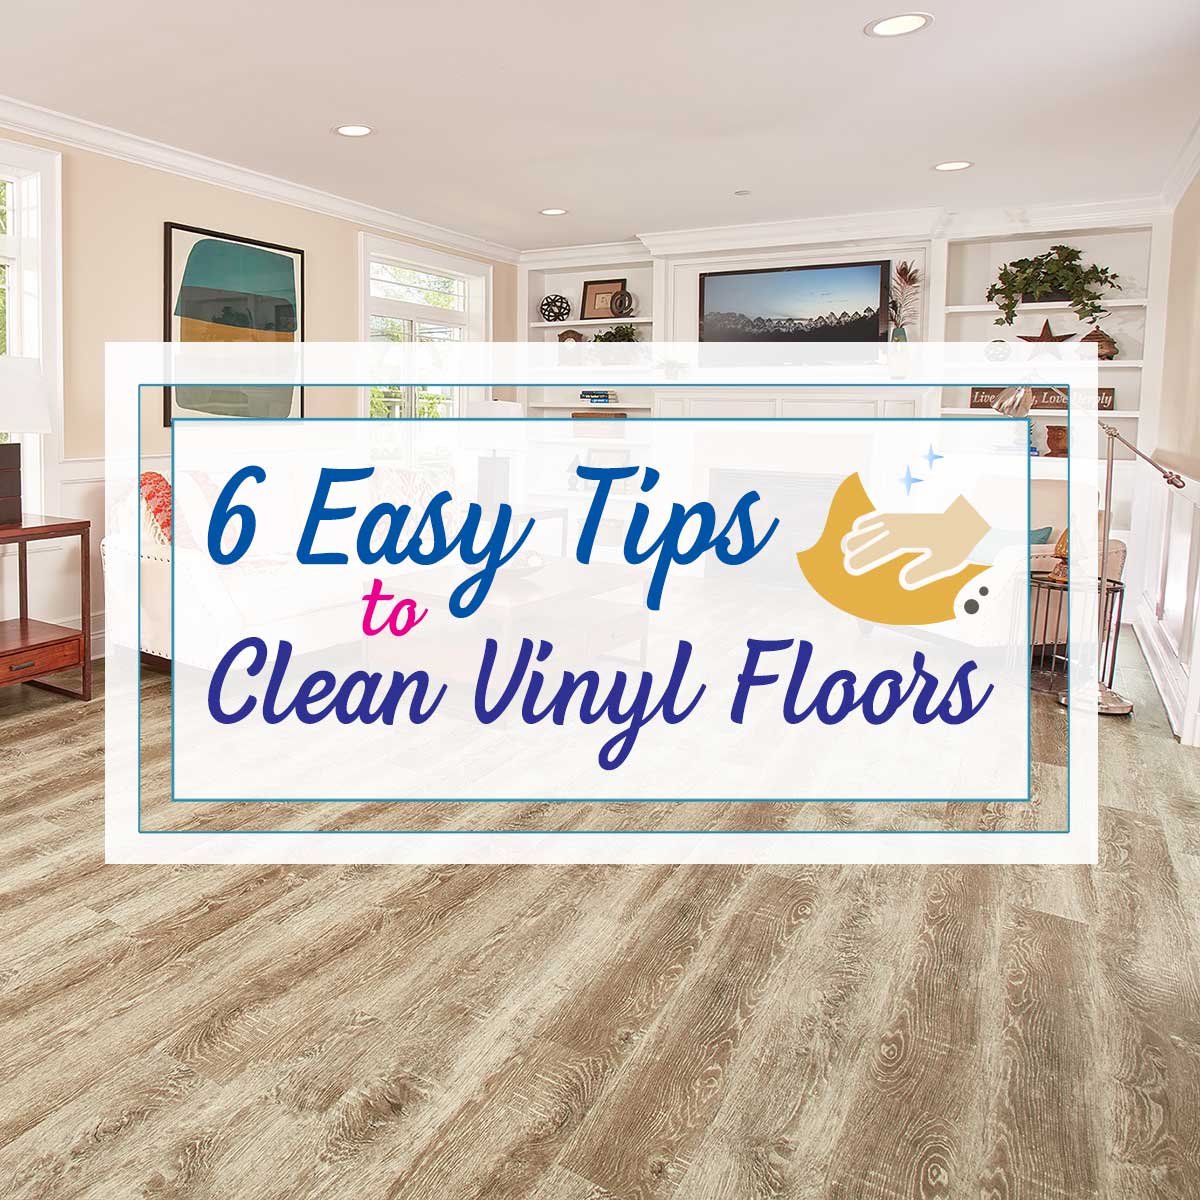 Don't Stress the Mess: 6 Easy Tips to Clean Vinyl Floors - Empire